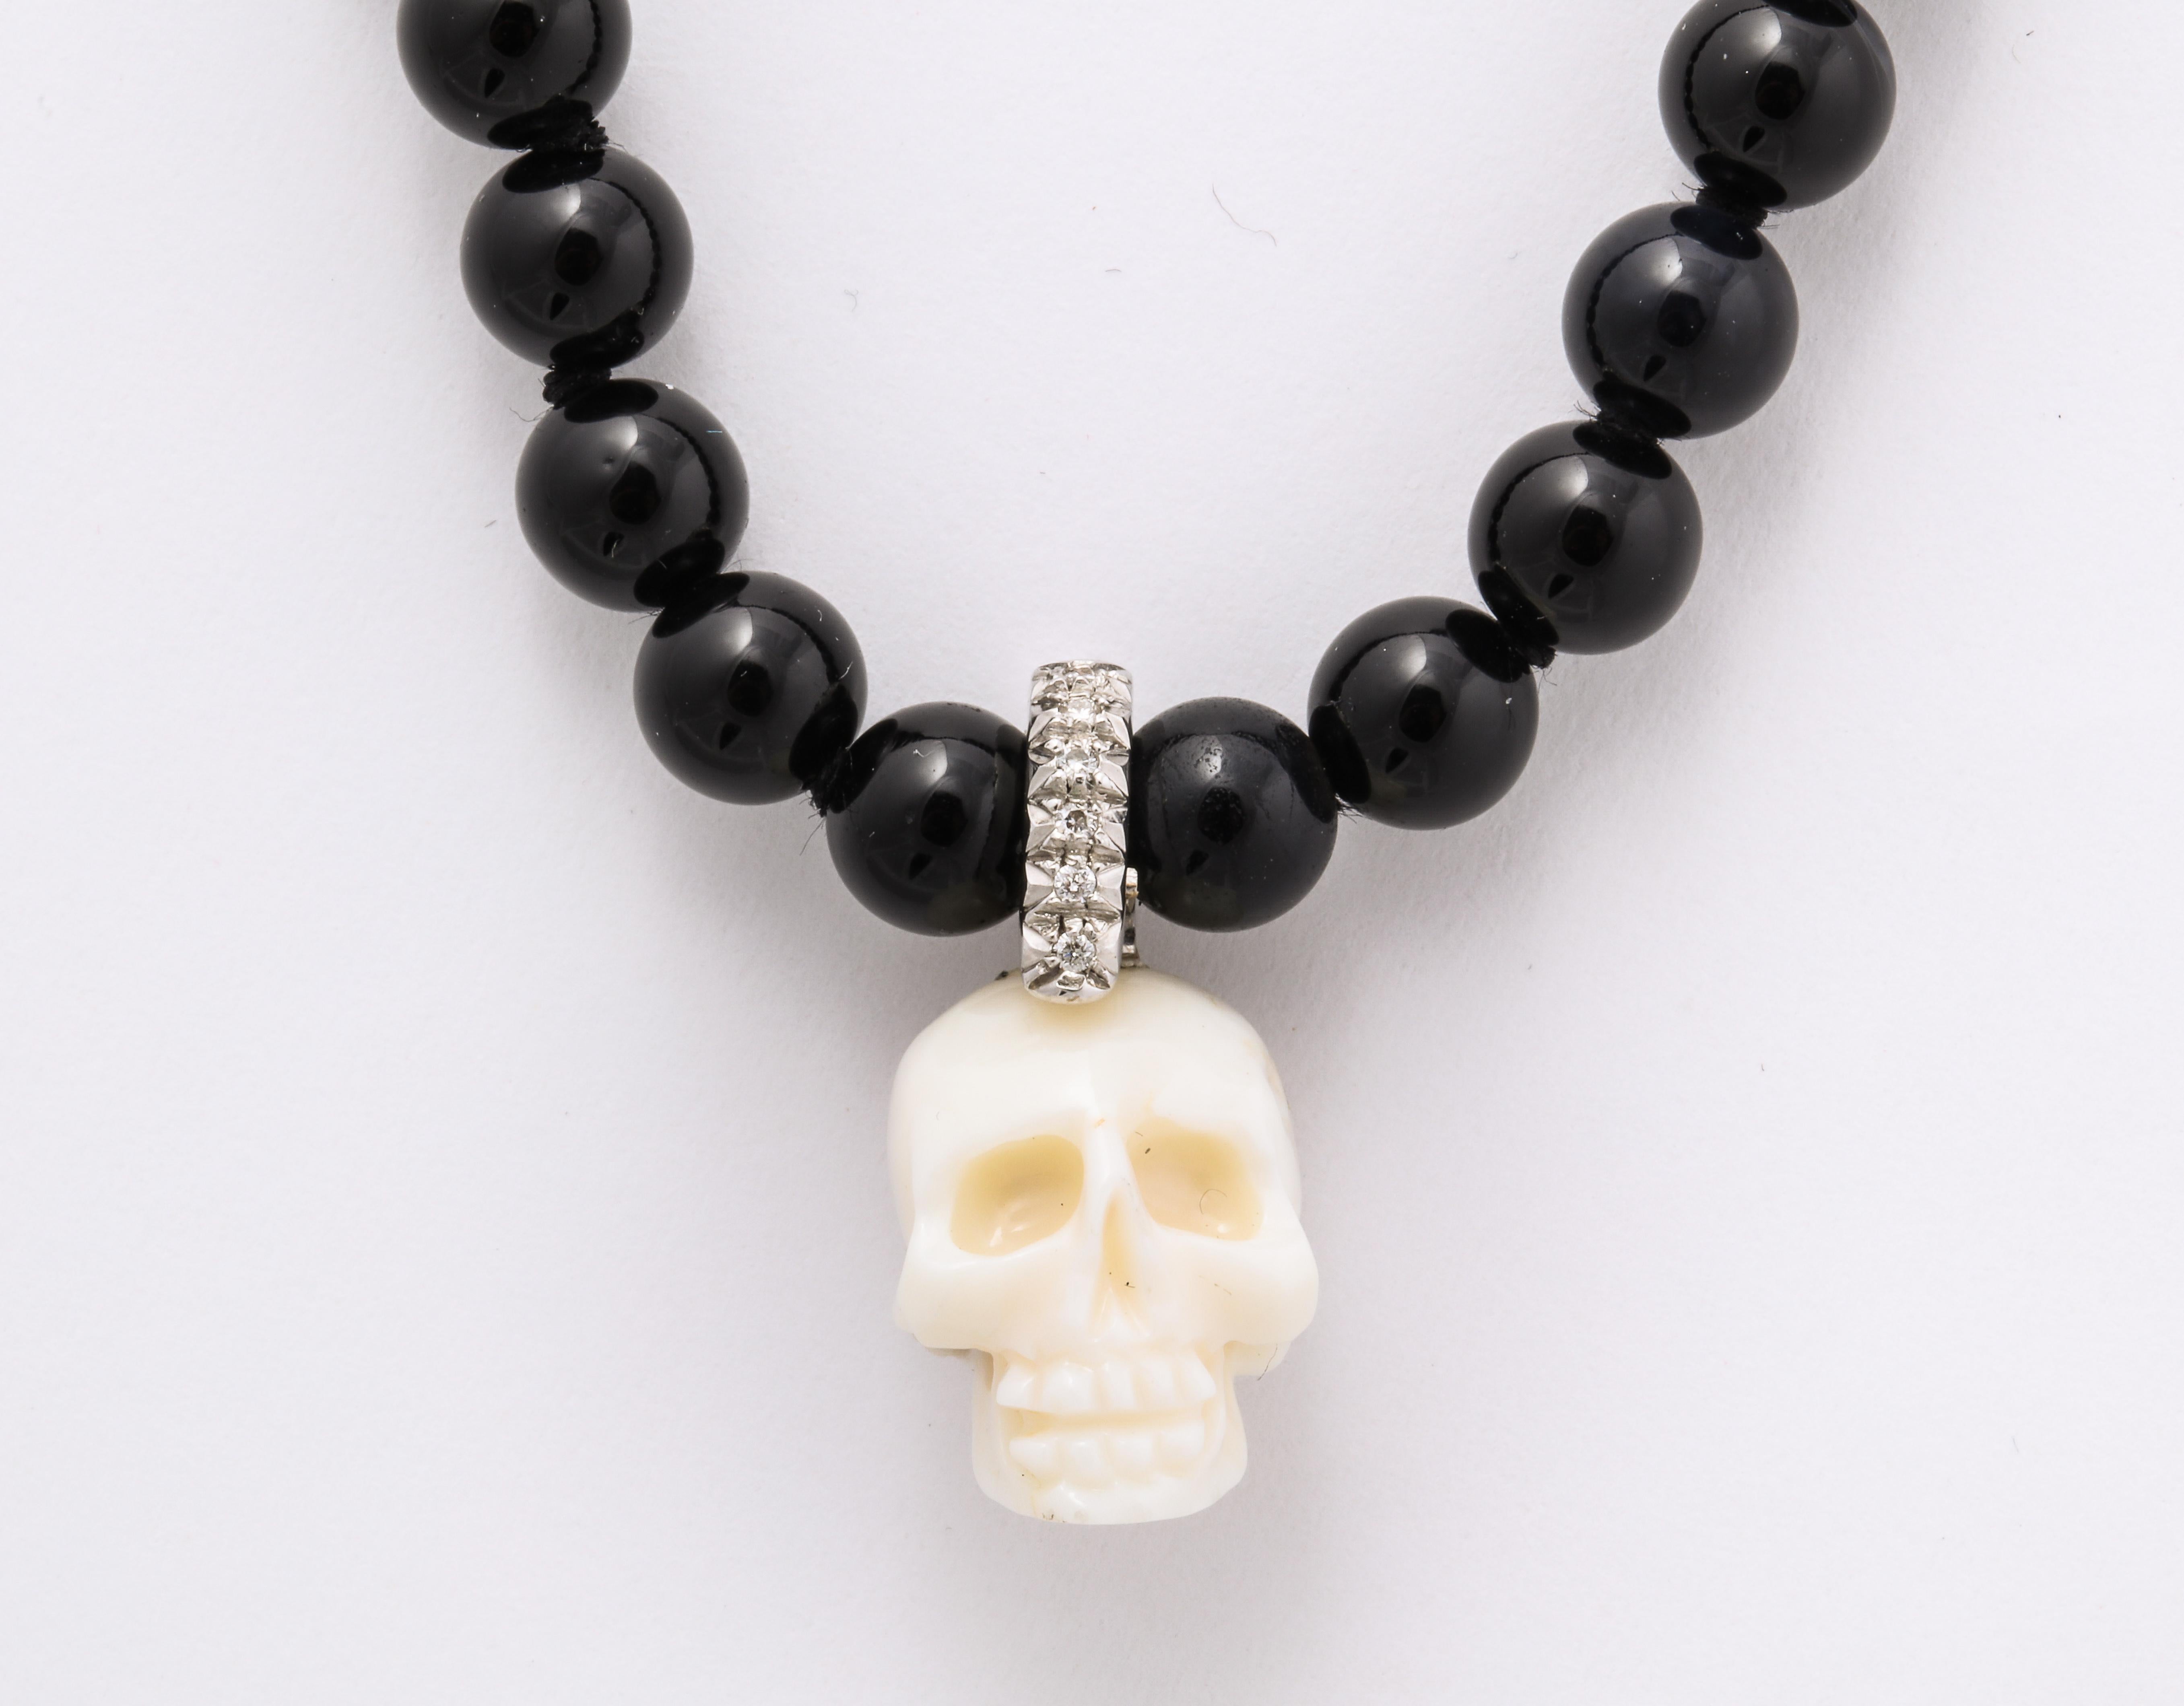 The dramatic contrast of the natural Italian white coral skull enhanced with a diamond crown on pitch black onyx beads makes for a spectacular yet simple necklace to wear anywhere and for any occasion.  As a further wonderful feature - the skull is